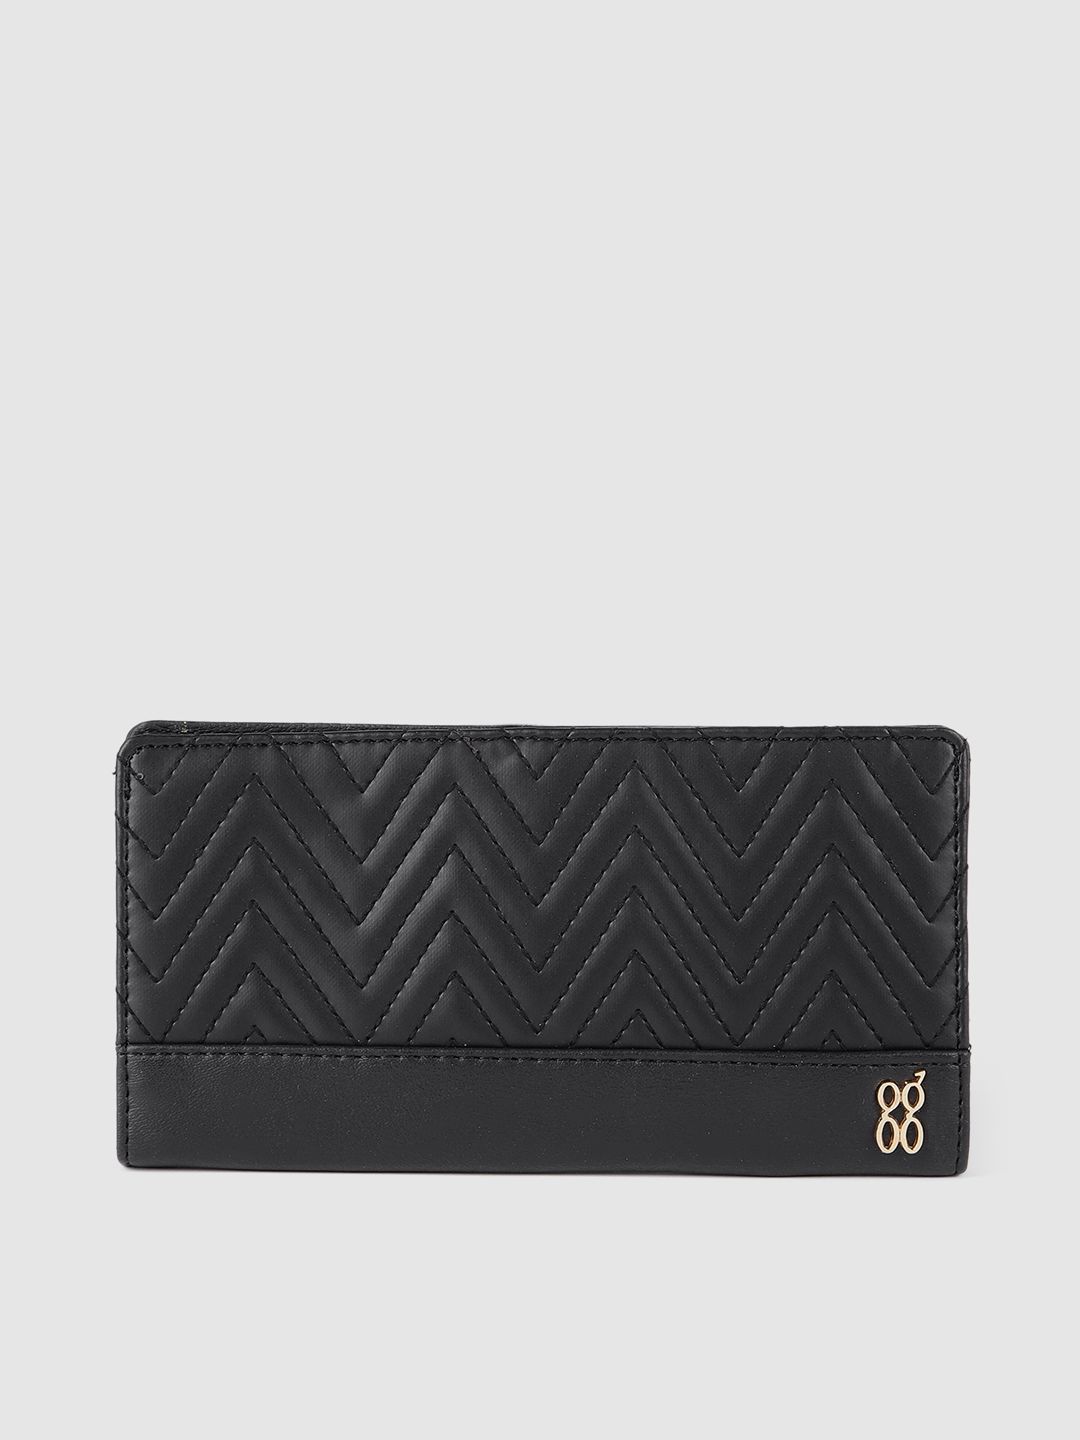 Baggit Women Black Textured Two Fold Wallet Price in India